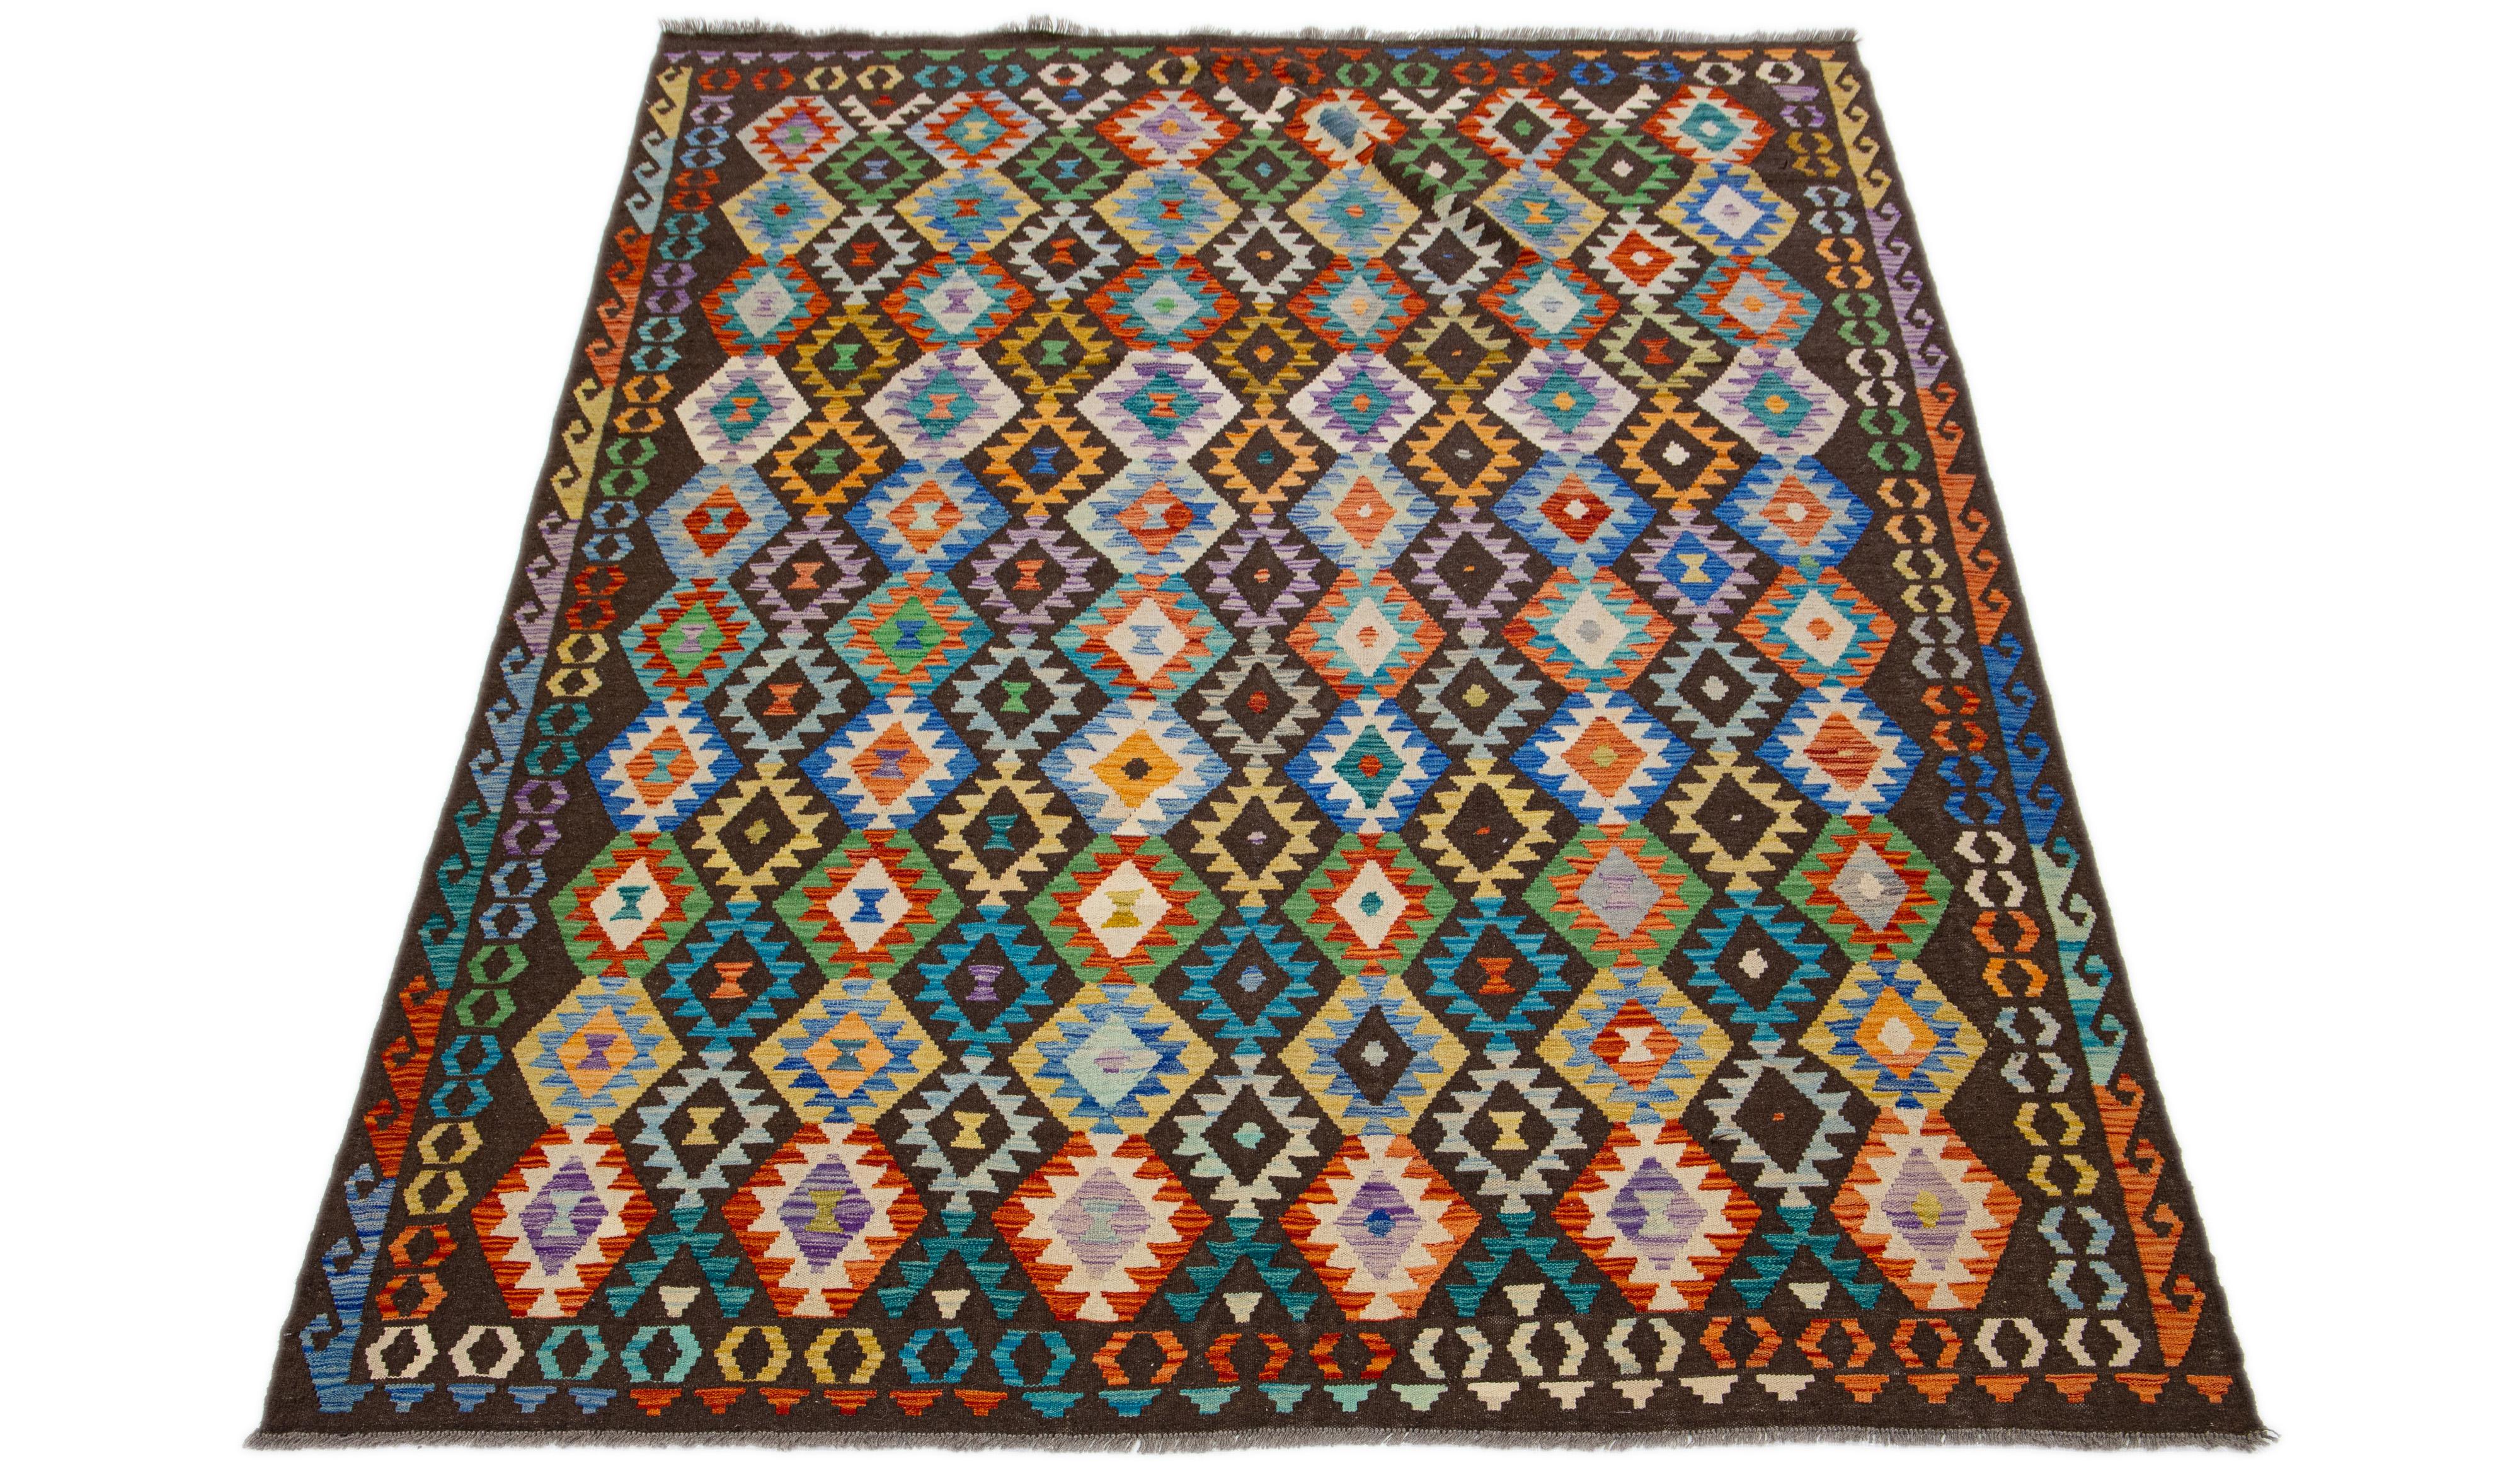 This Wool Rug is a brilliant showcase of the modern Kilim style. It features a lively multi-colored field, consciously enriched with a refined, all-over geometric pattern. Every detail is carefully hand-crafted.

This rug measures: 8'6